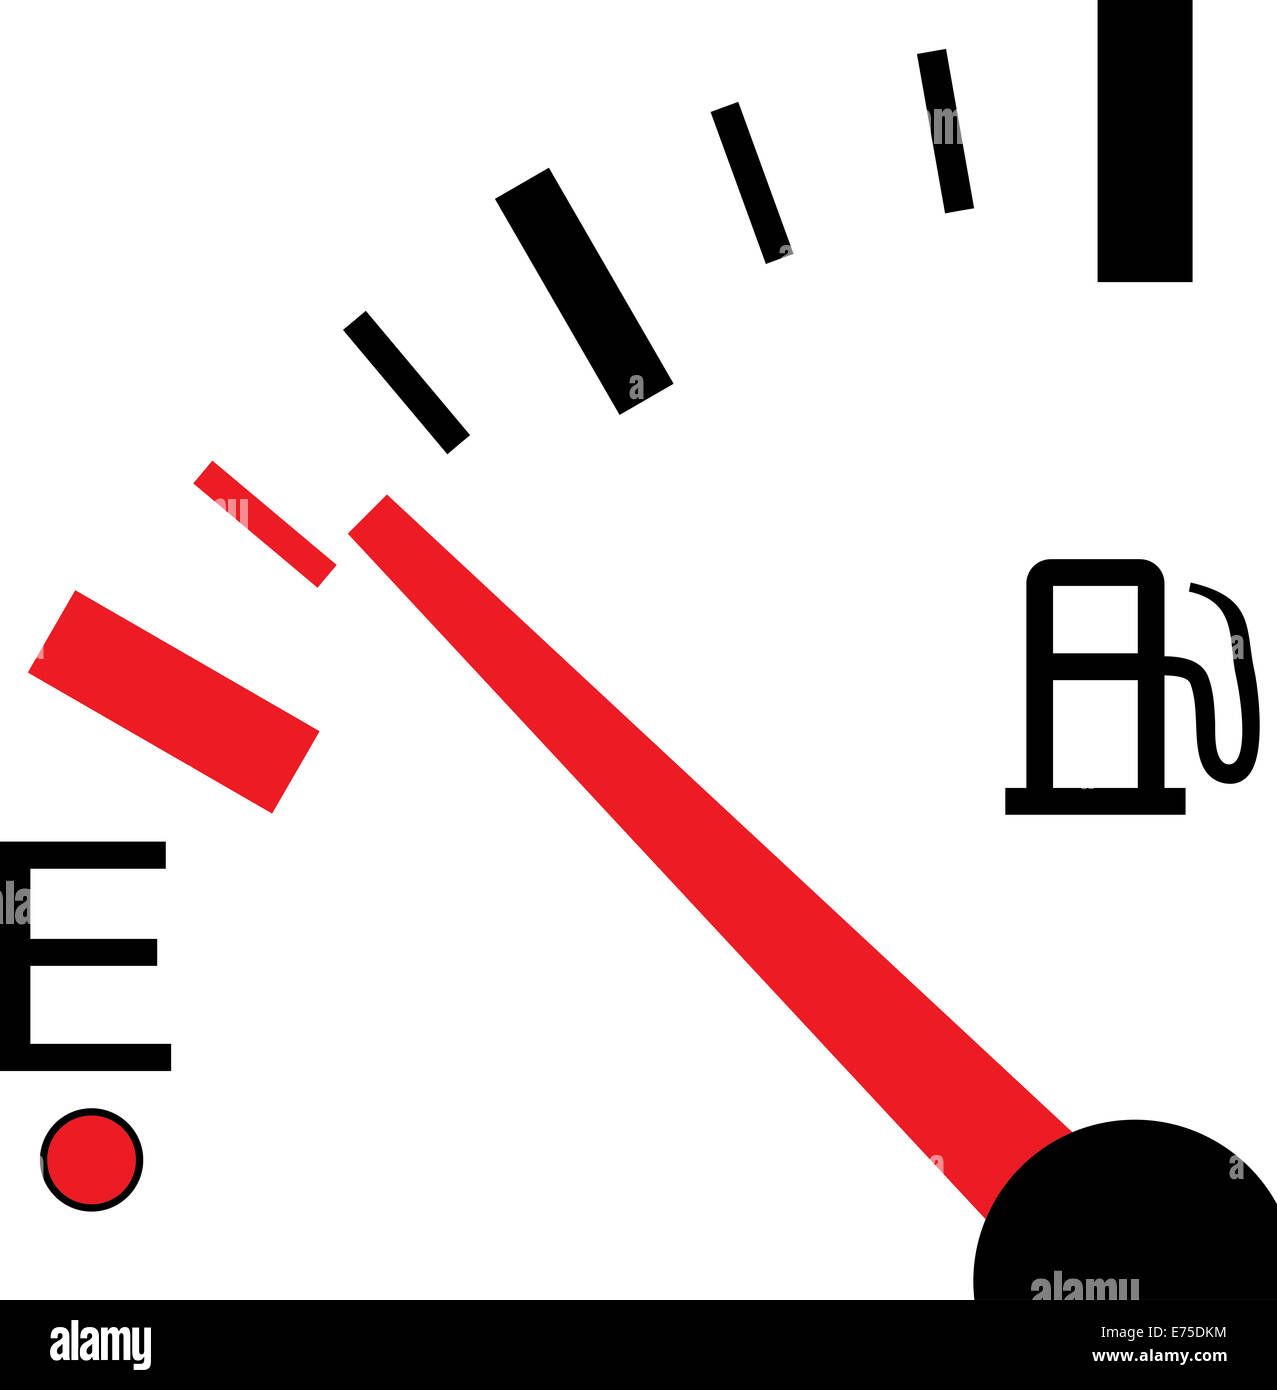 An Illustration of a Fuel Gauge on White Background Stock Photo